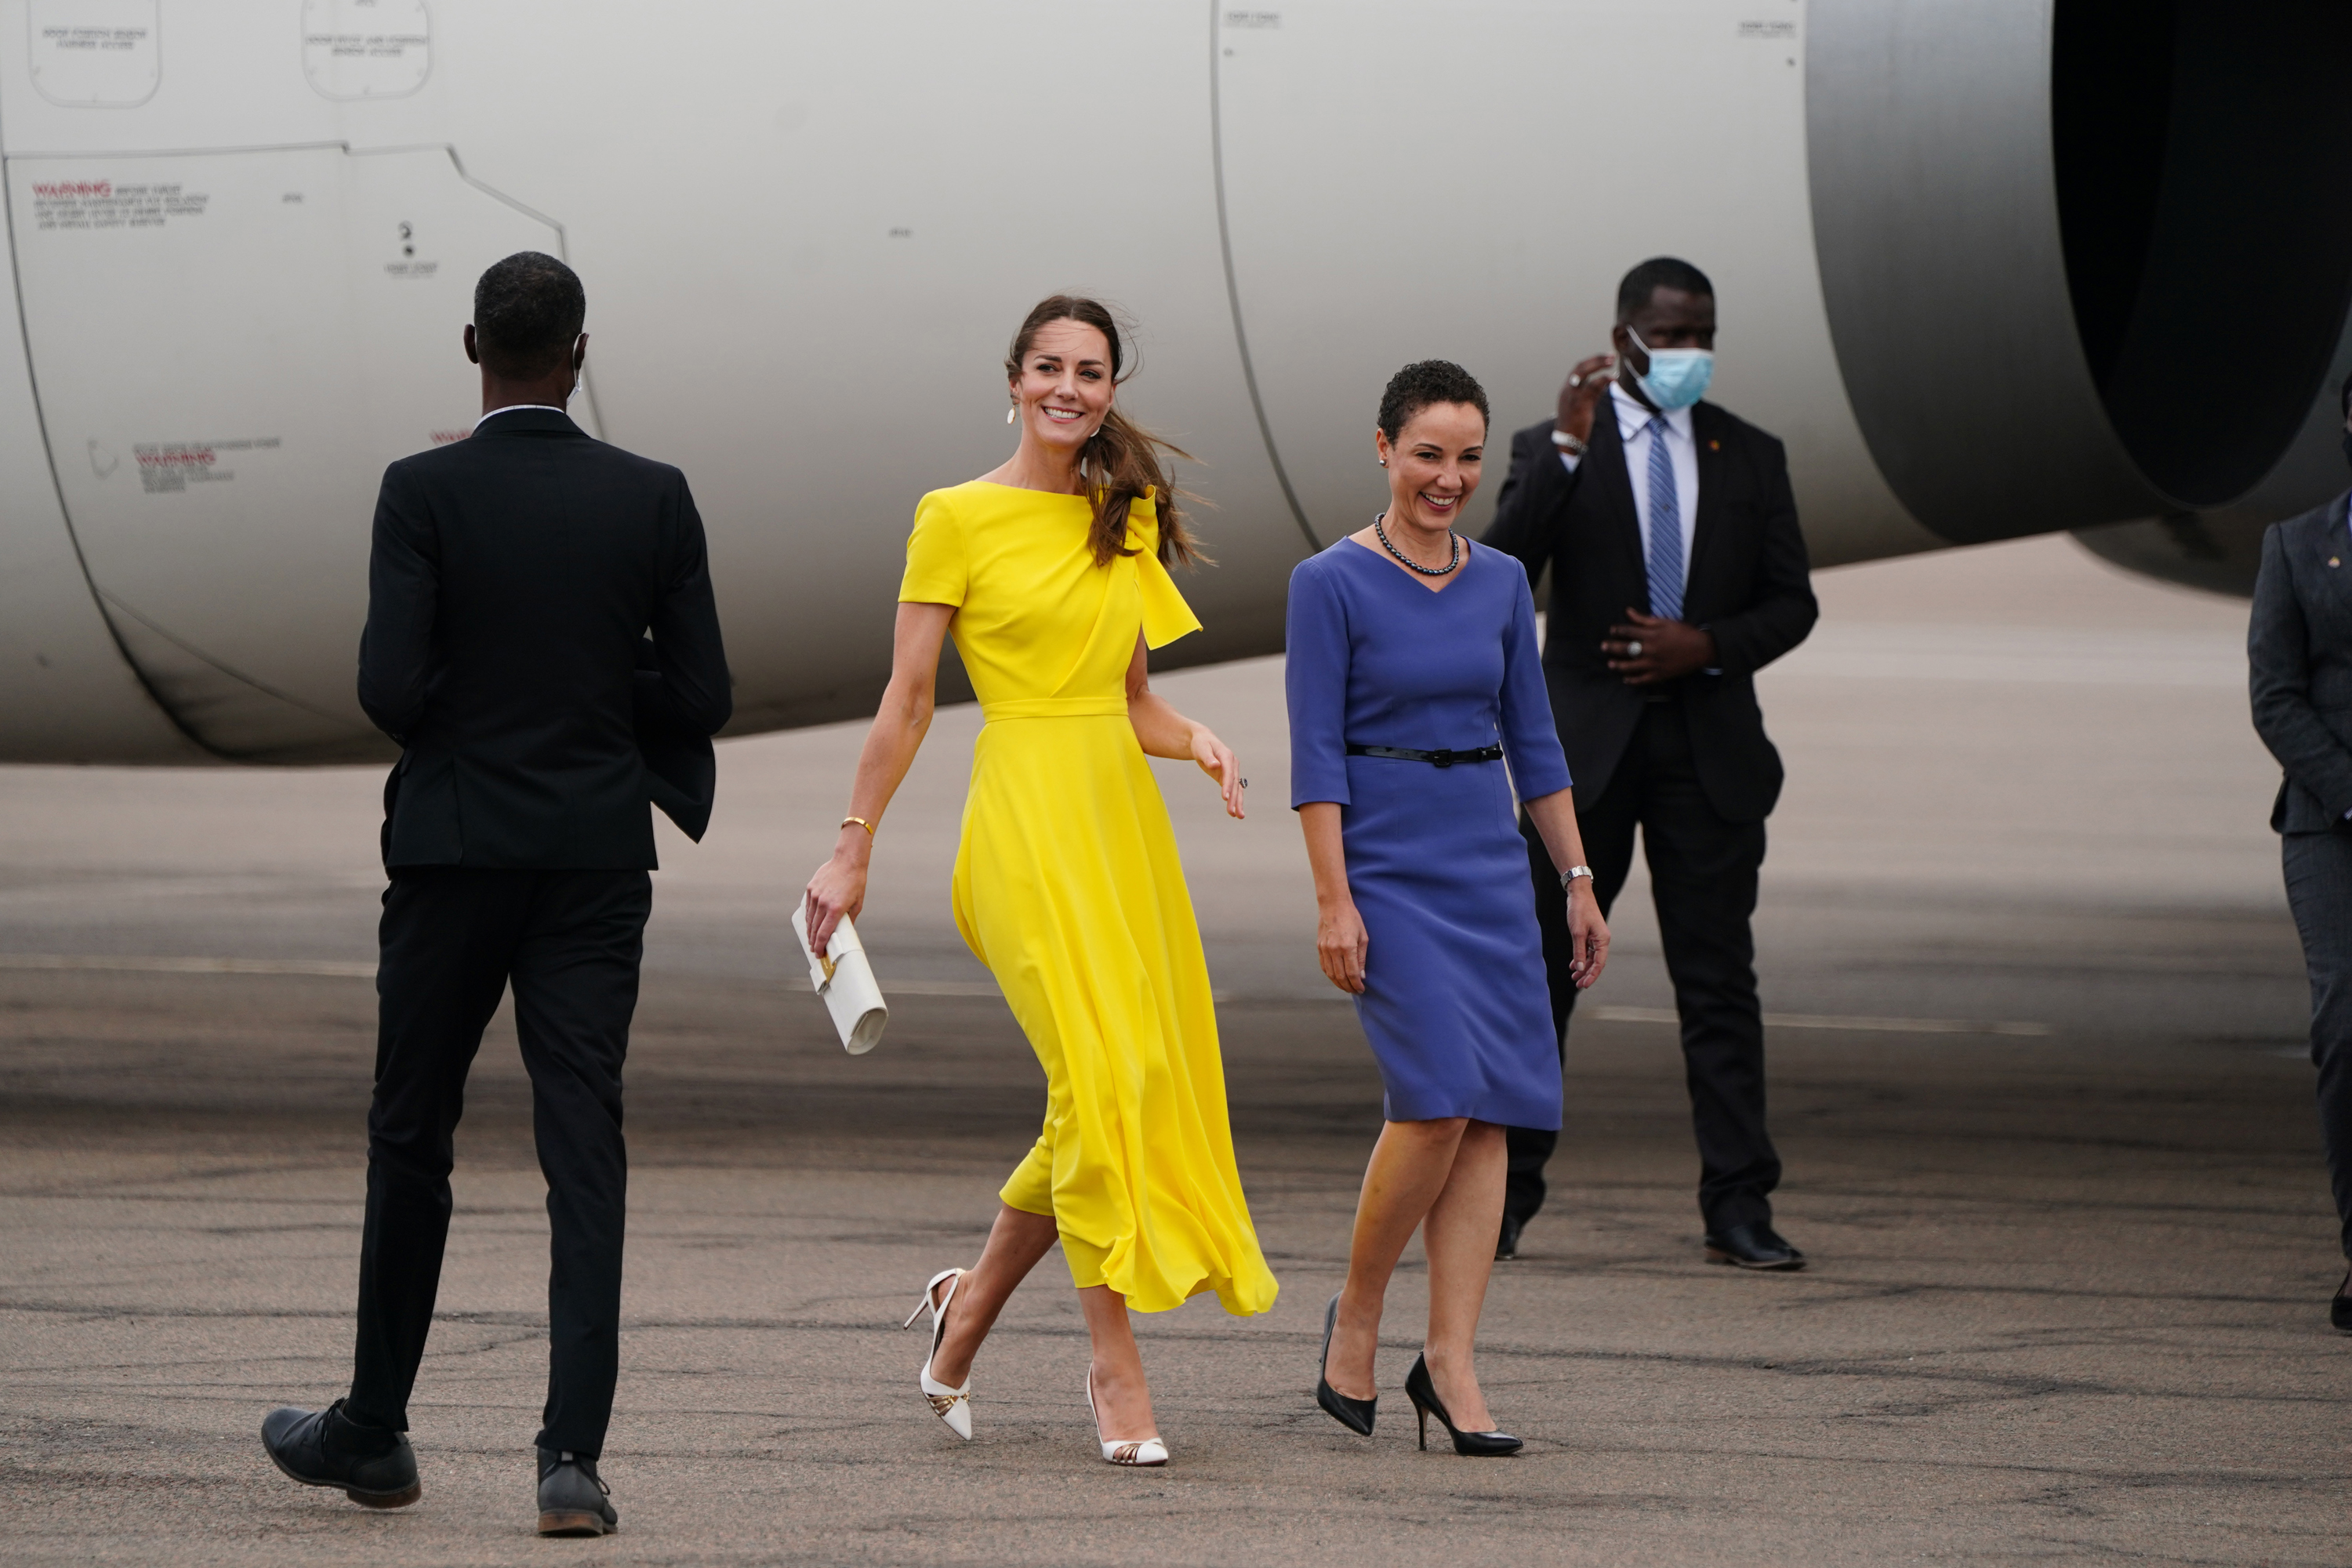 The Princess of Wales arrives at Norman Manley International Airport in Kingston, Jamaica